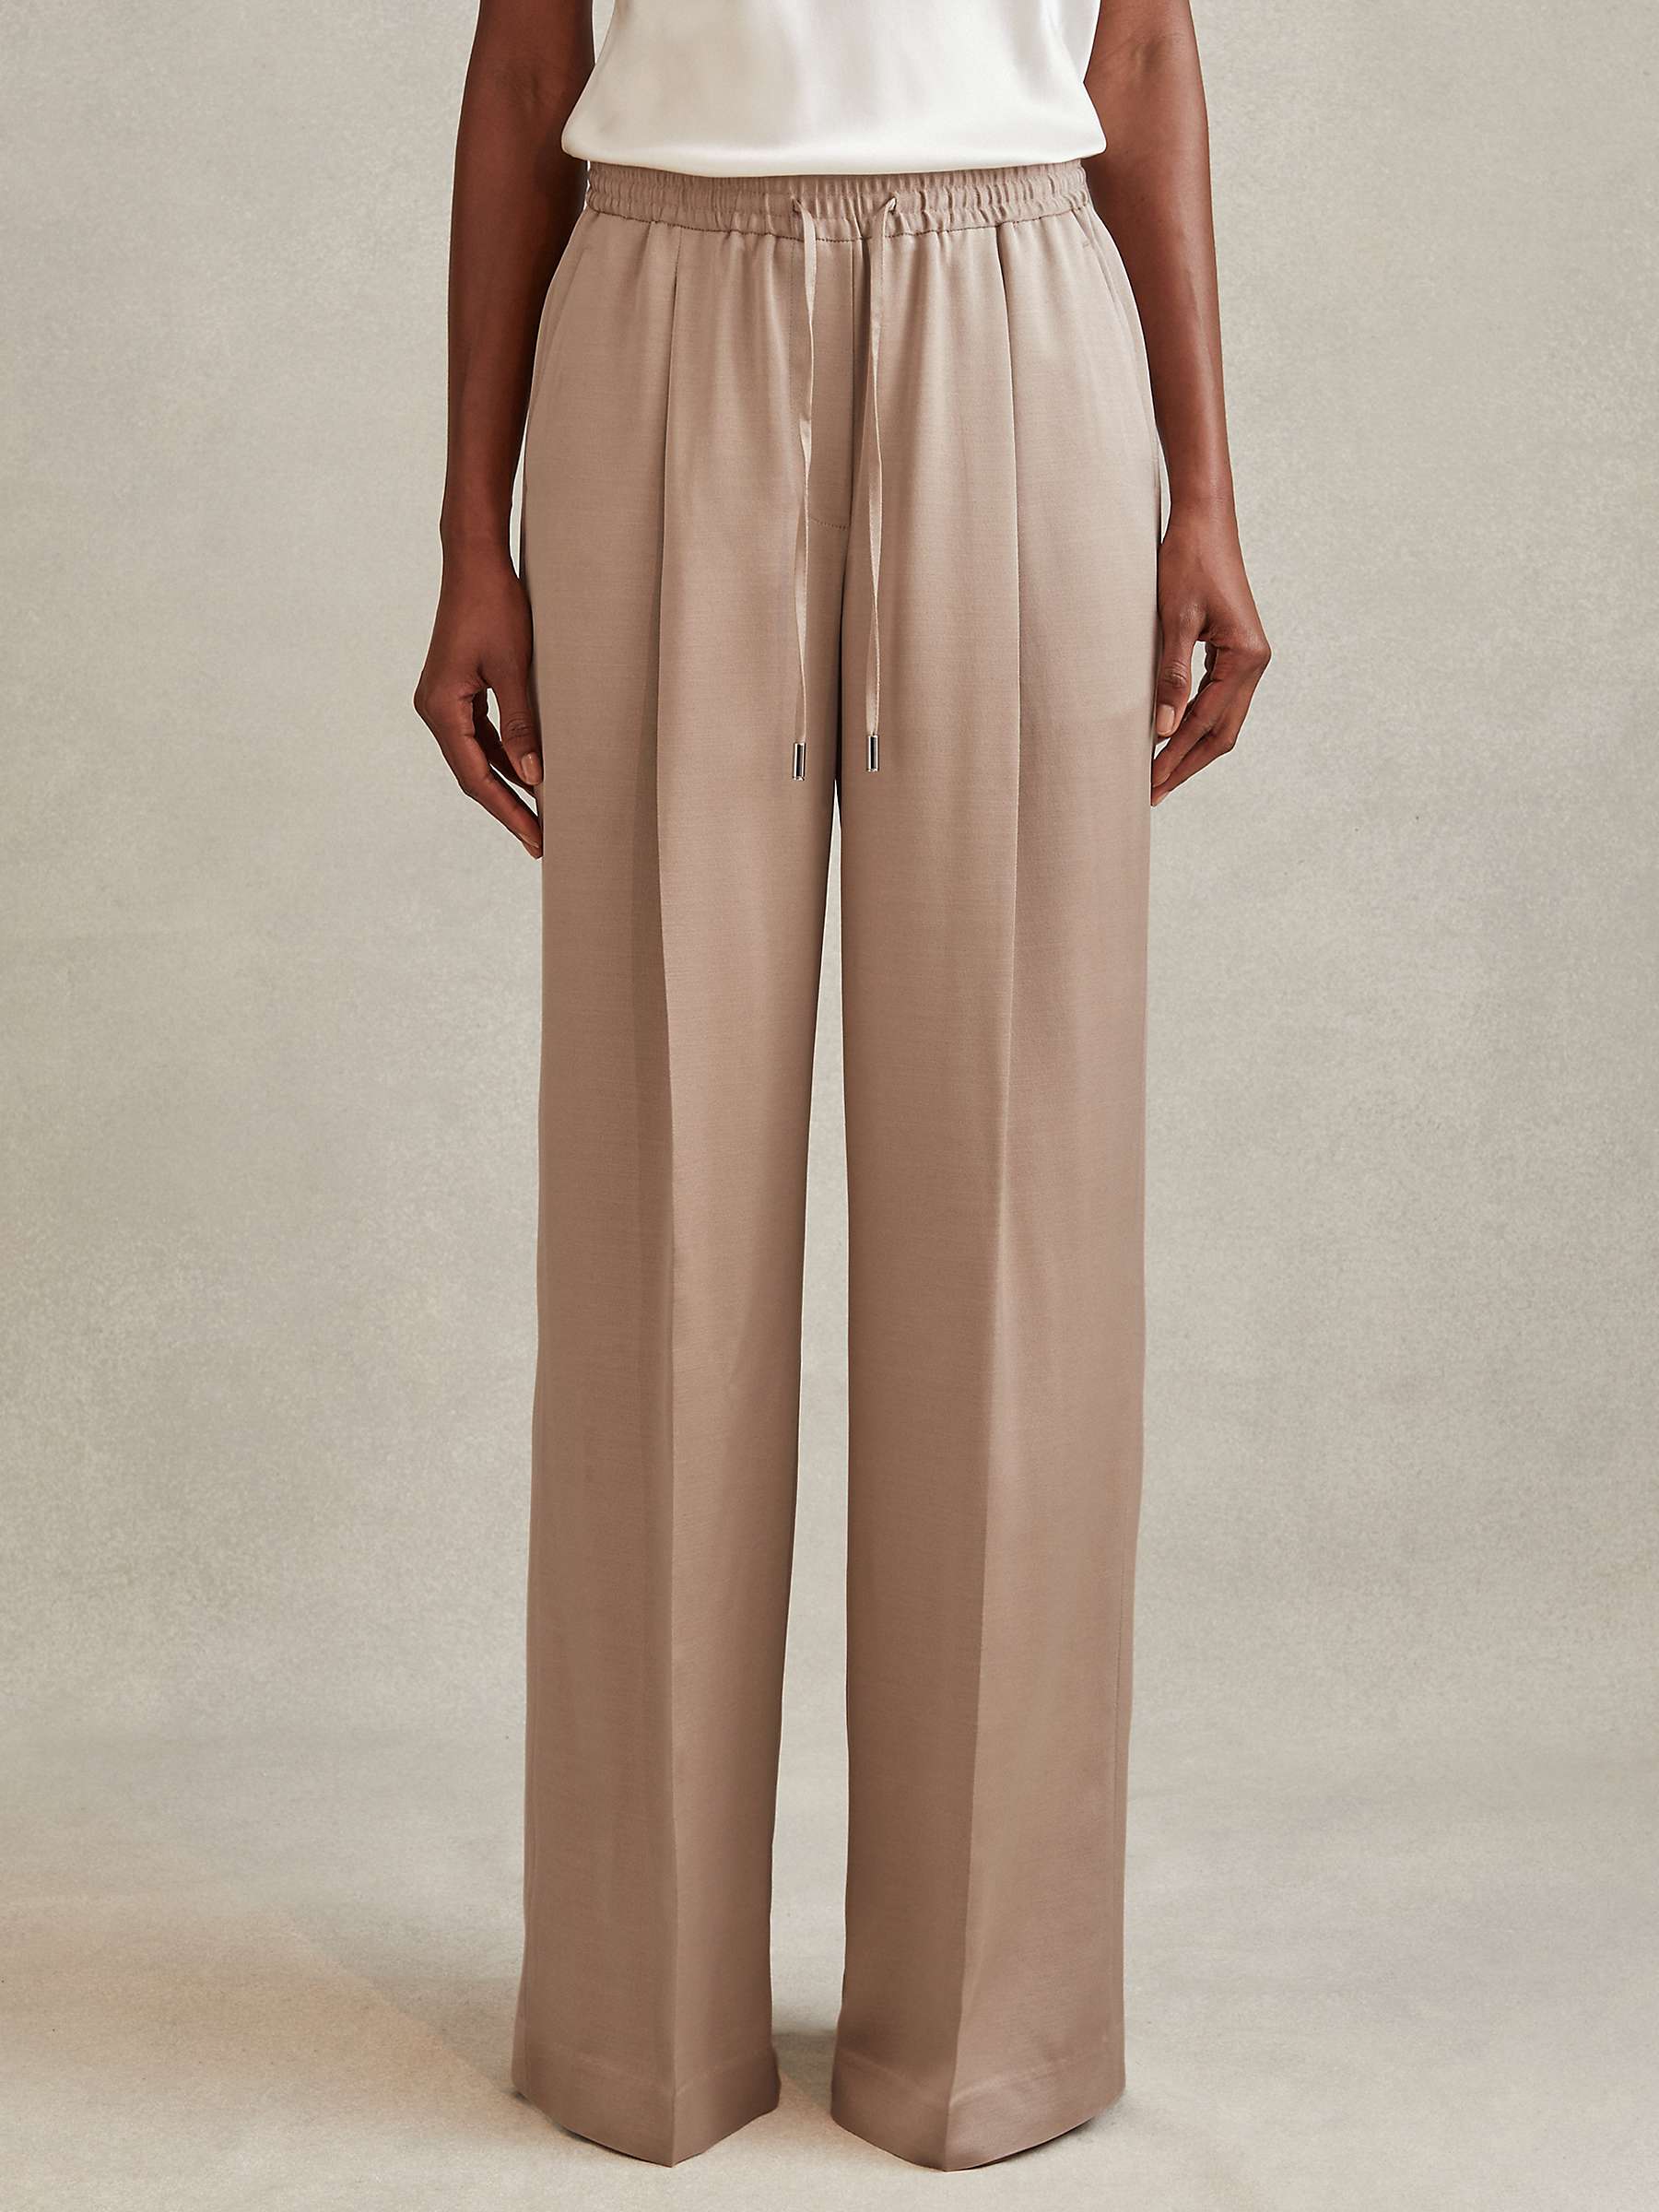 Buy Reiss Cole Wide Leg Satin Drawstring Suit Trousers, Gold Online at johnlewis.com